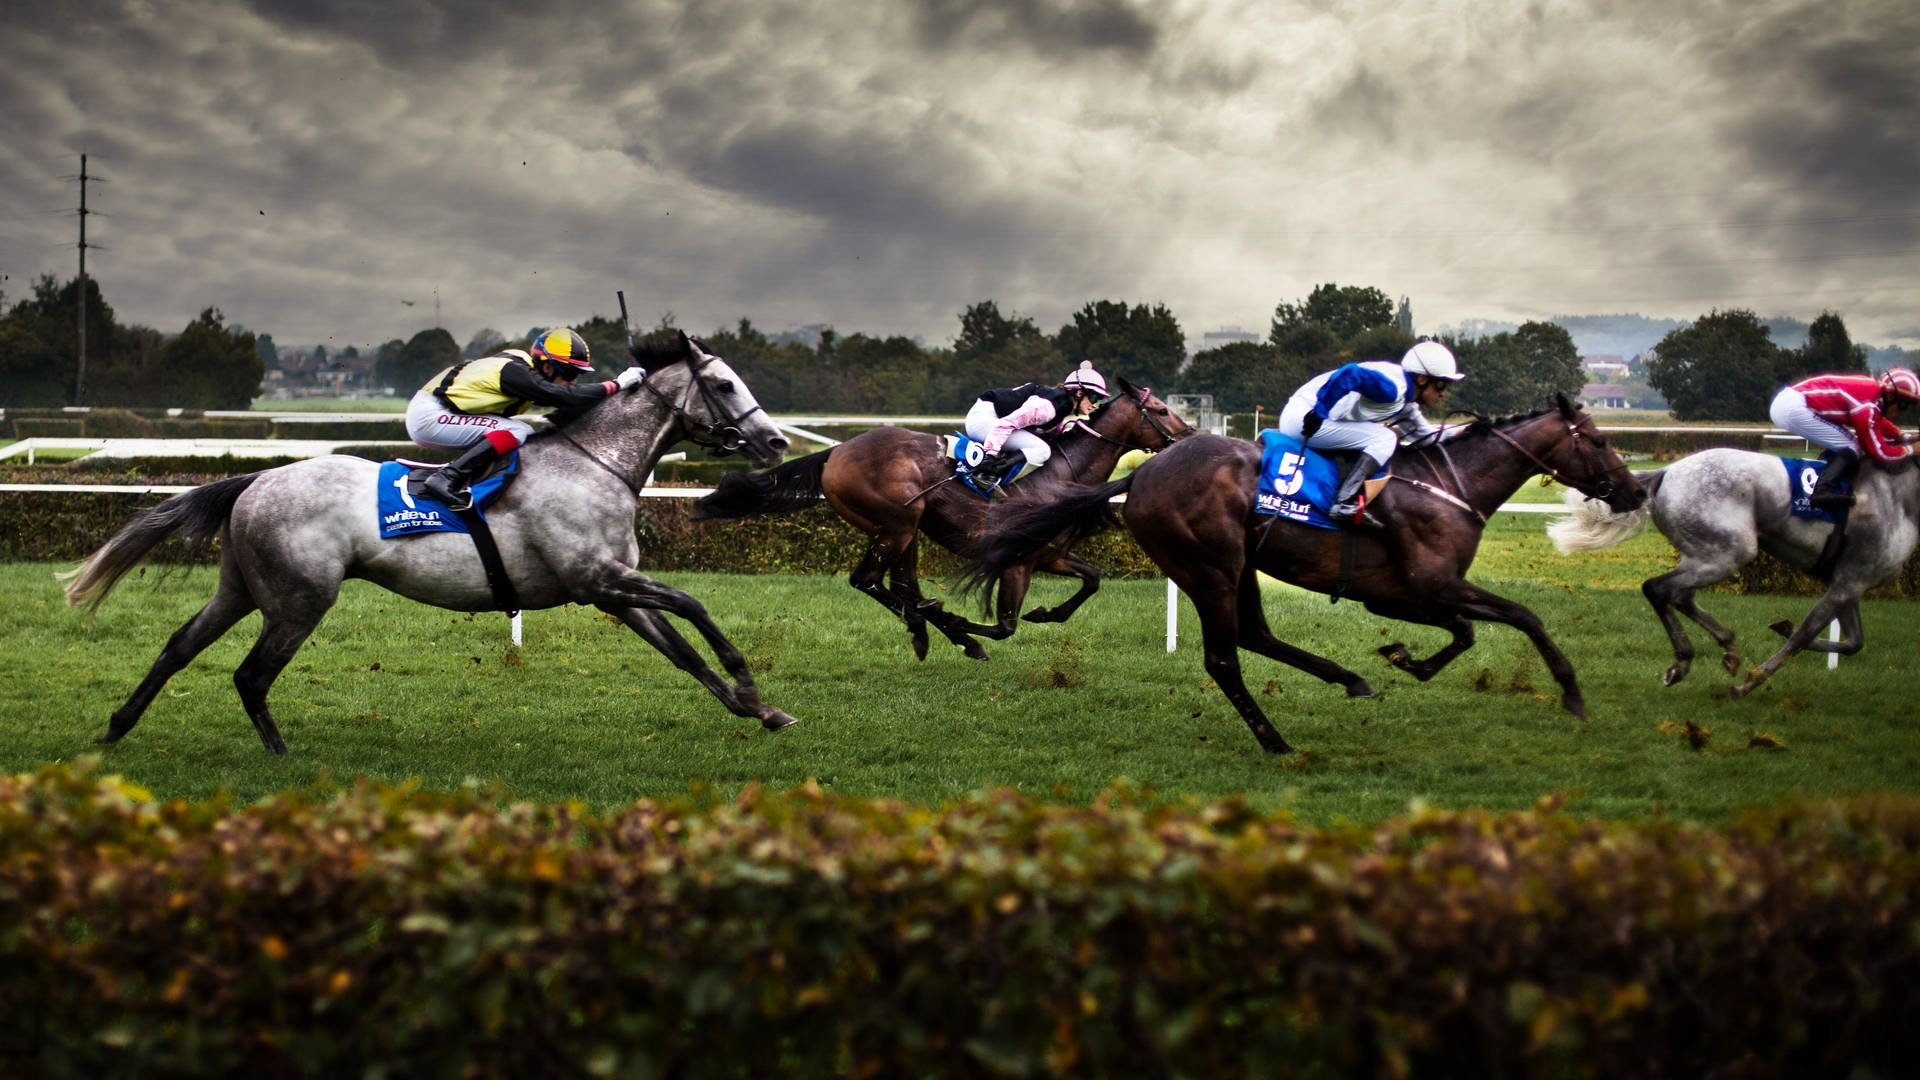 Horse Racing In A Bad Weather Wallpaper